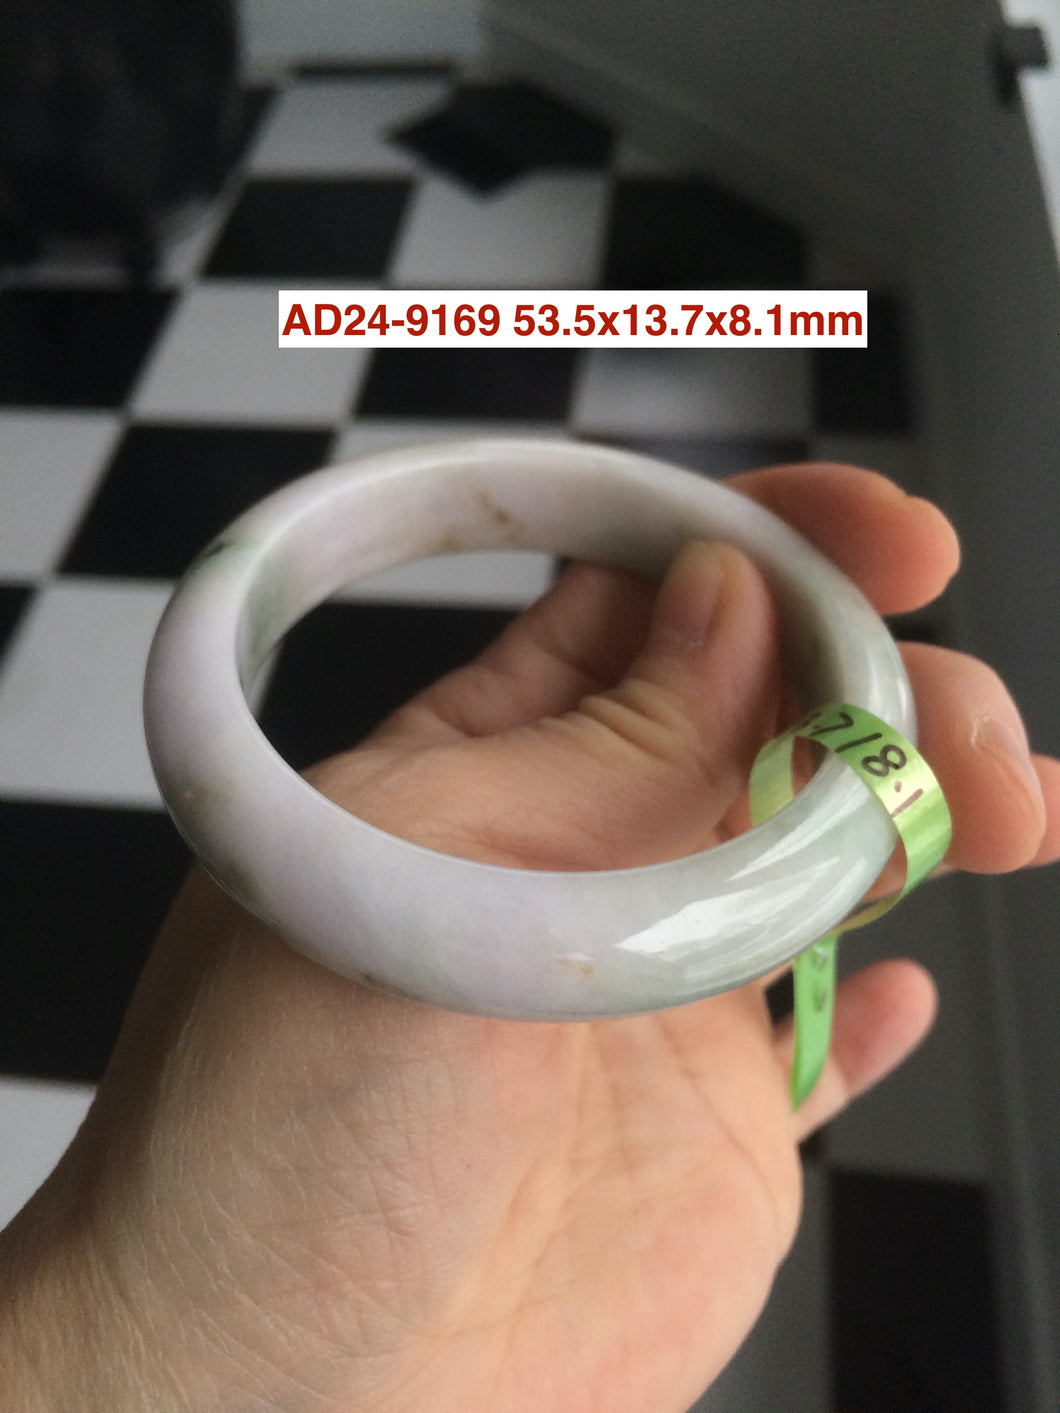 53-62mm certified Type A 100% Natural sunny green/white/purple/pale pink/black Jadeite Jade bangle (with defects) group AD24